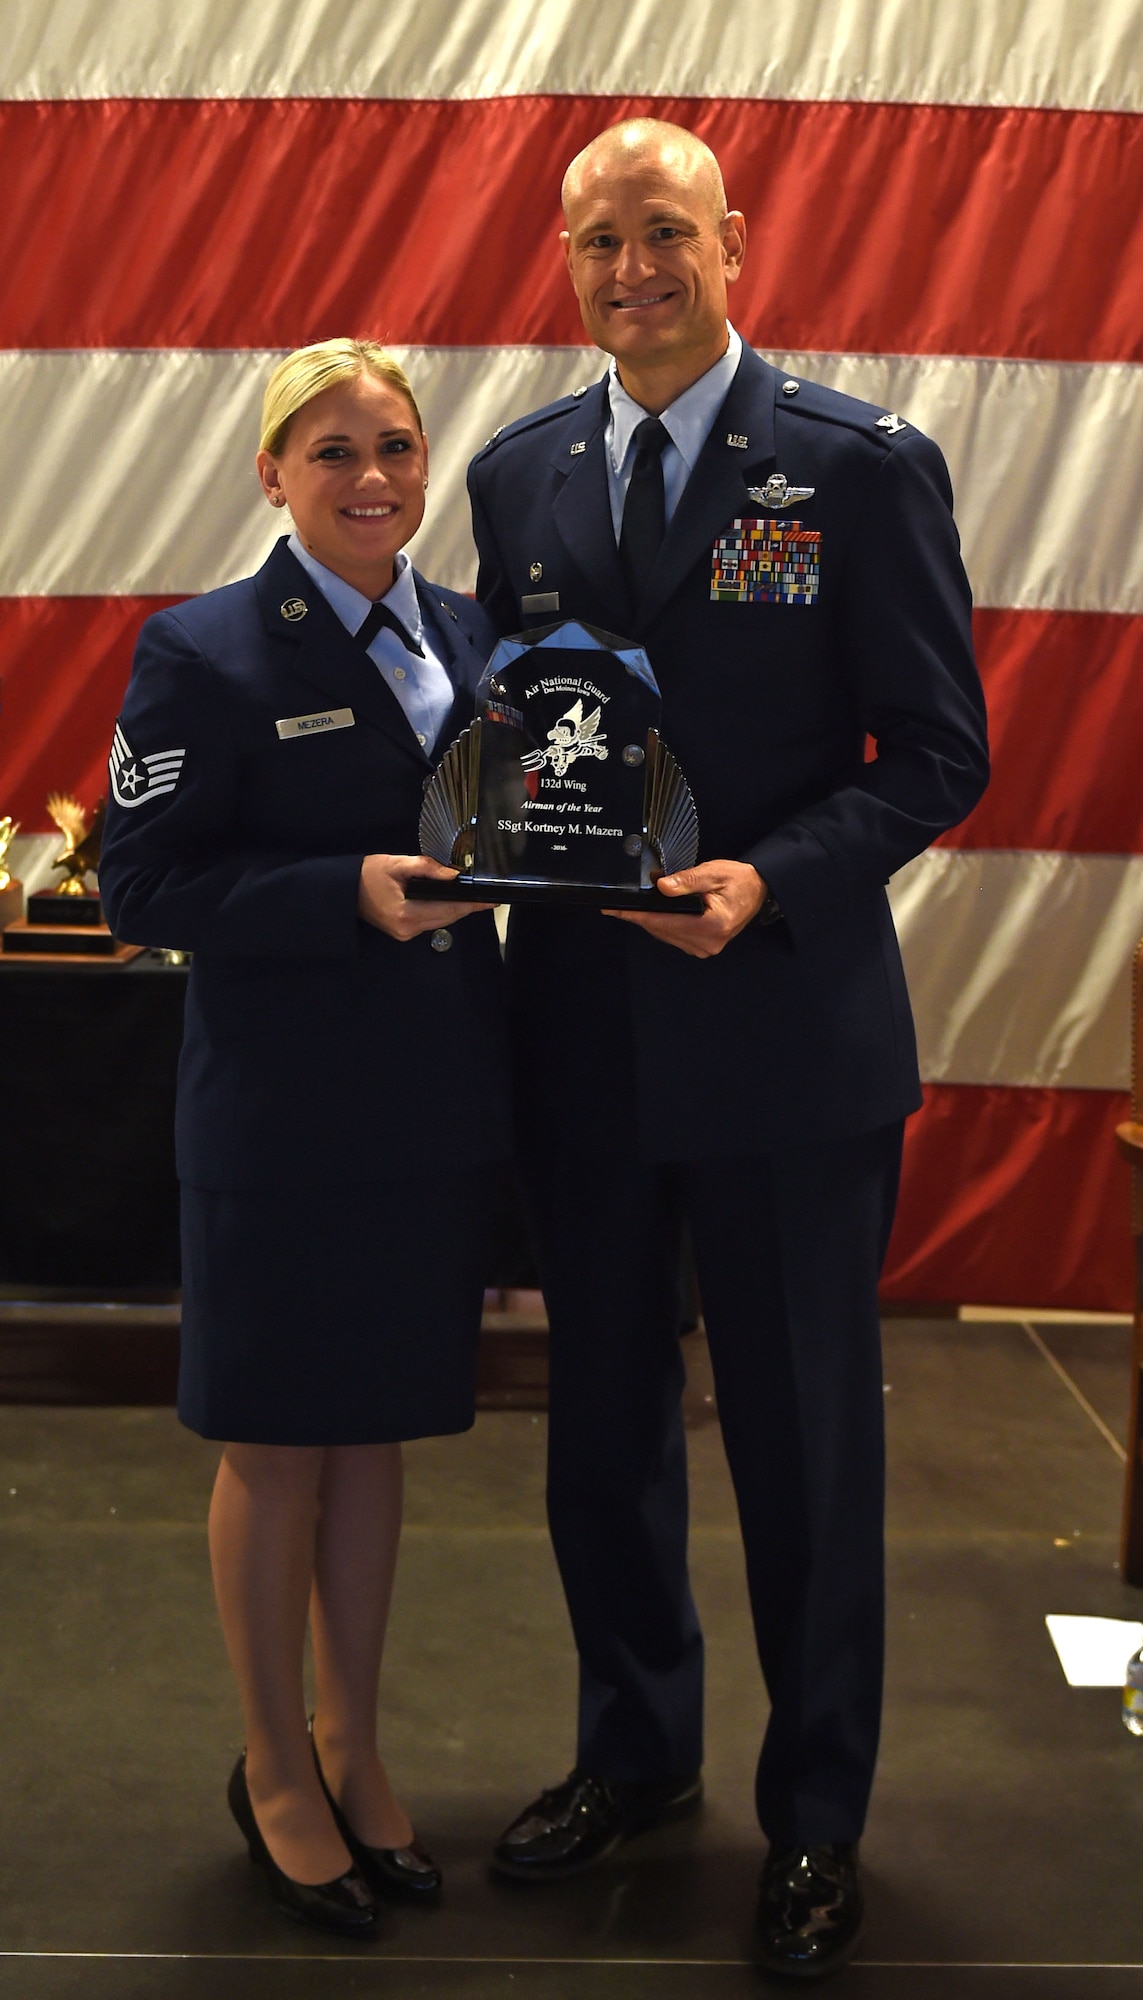 Staff Sgt. Kortney M. Mazera receives the 132d Wing Airman of the Year Award from Col. Shawn Ford, commander 132d Wing on November 5, 2016 at the Des Moines Airbase. The award presentation was part of the 132d Wing's annual awards ceremony. (U.S. Air National Guard photo by Staff Sgt. Michael J. Kelly)